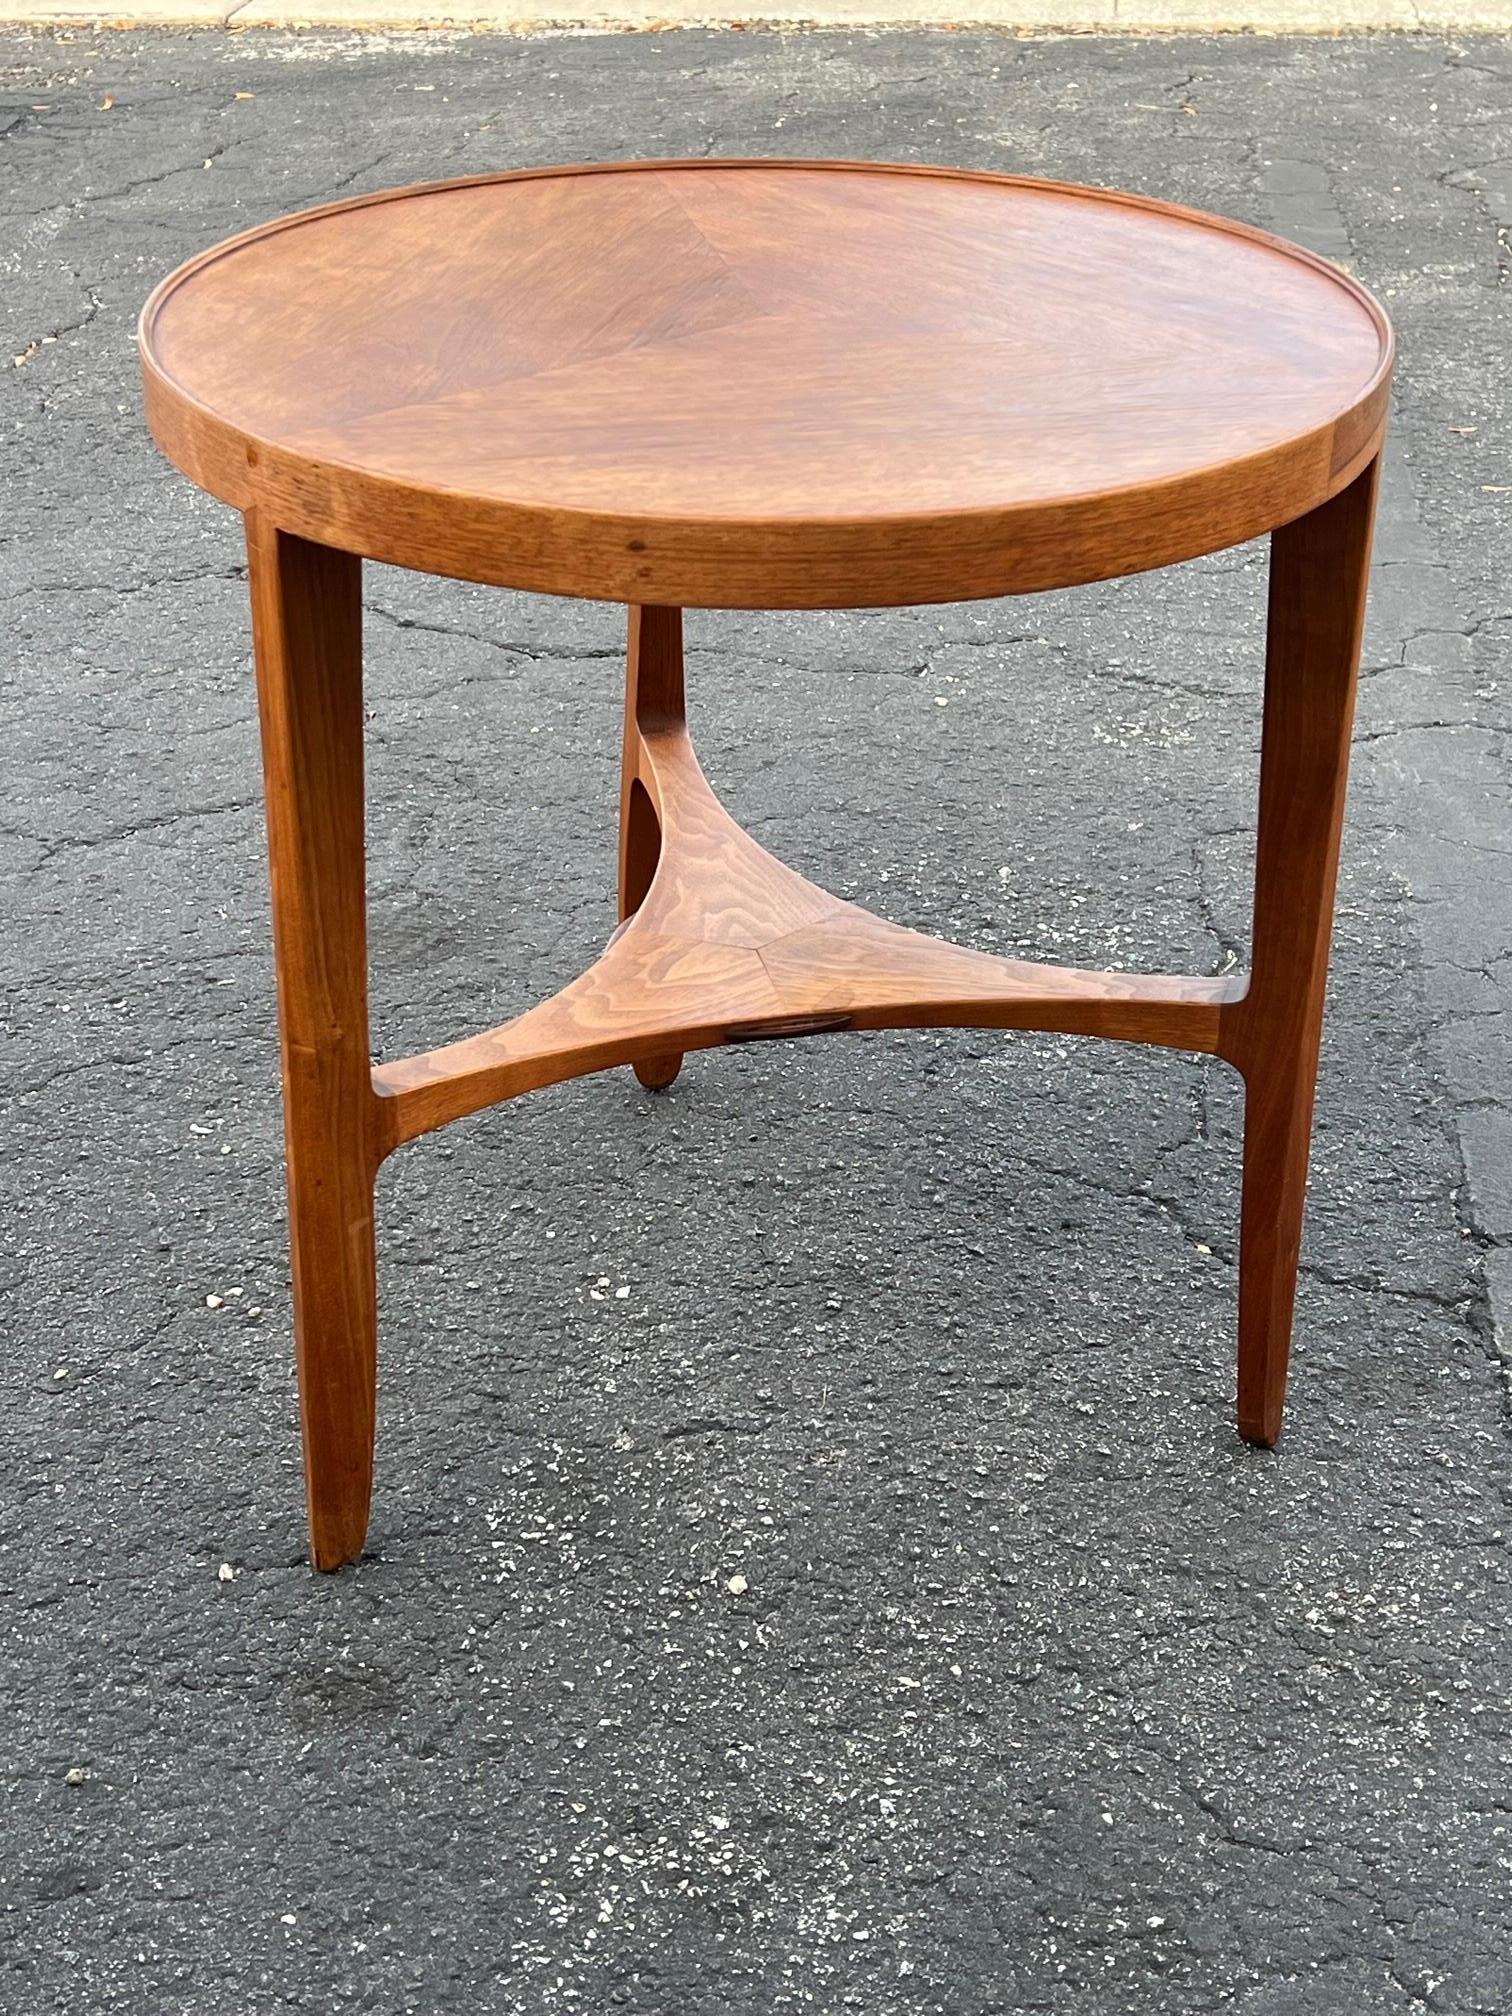 Mid-20th Century Edward Wormley Janus Side Table For Sale